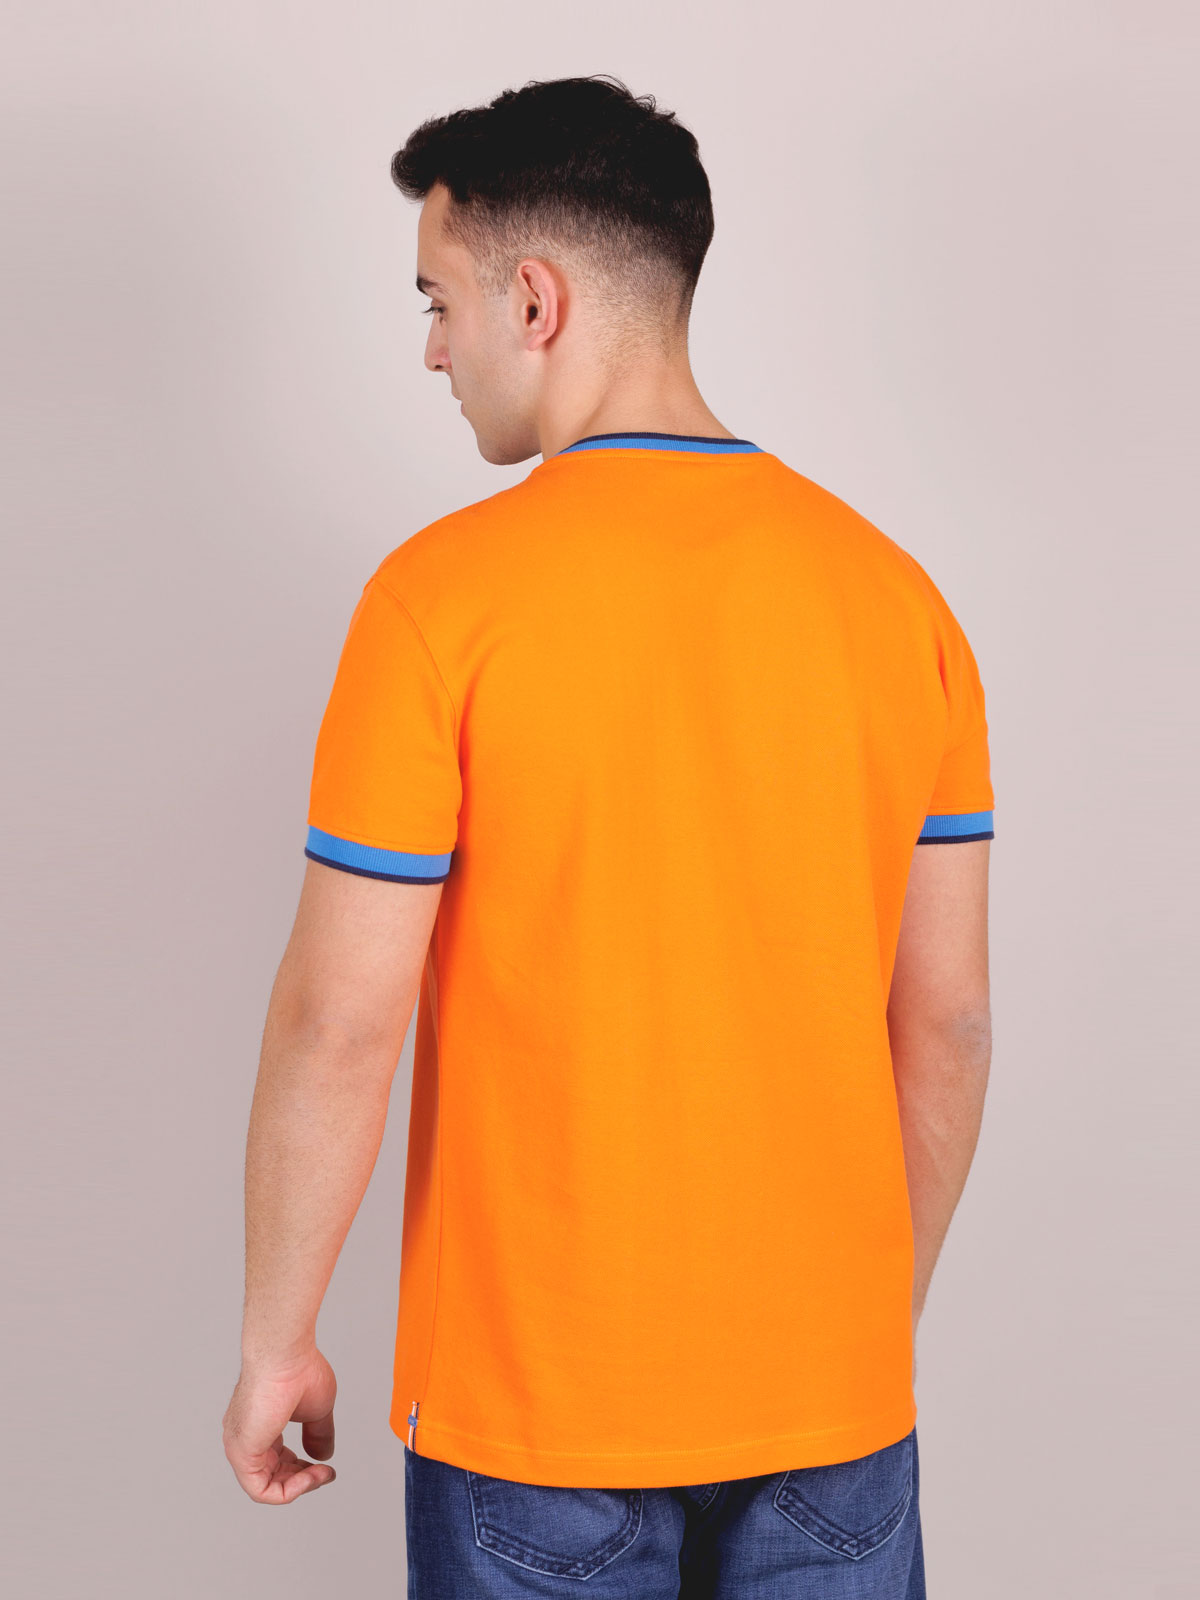 Tshirt in orange with a print - 95363 € 19.12 img2